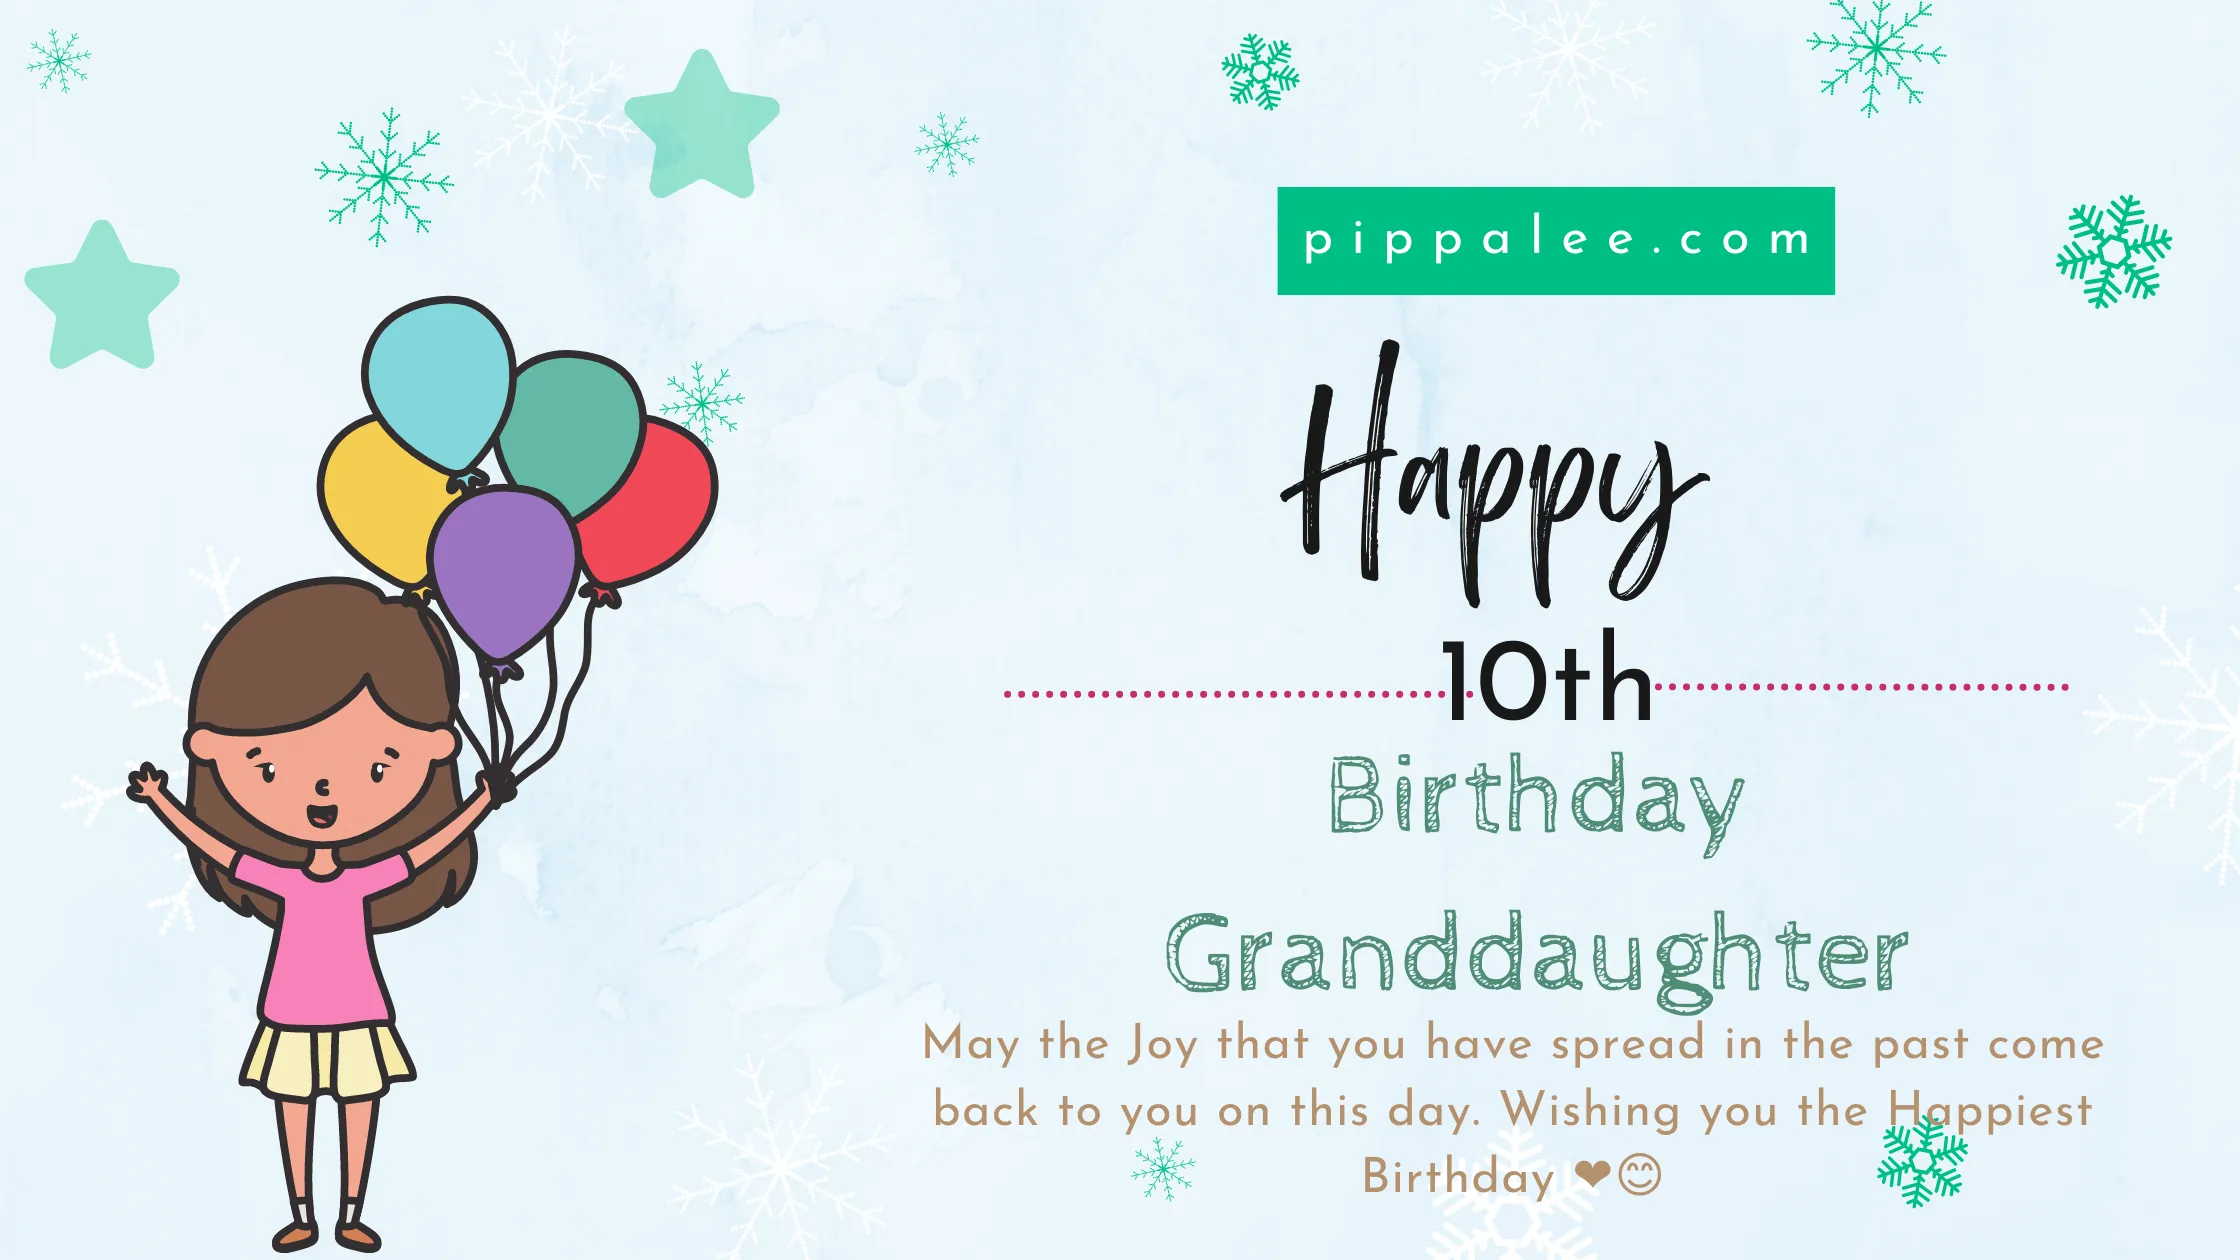 Happy 10th Birthday Granddaughter - Wishes & Messages